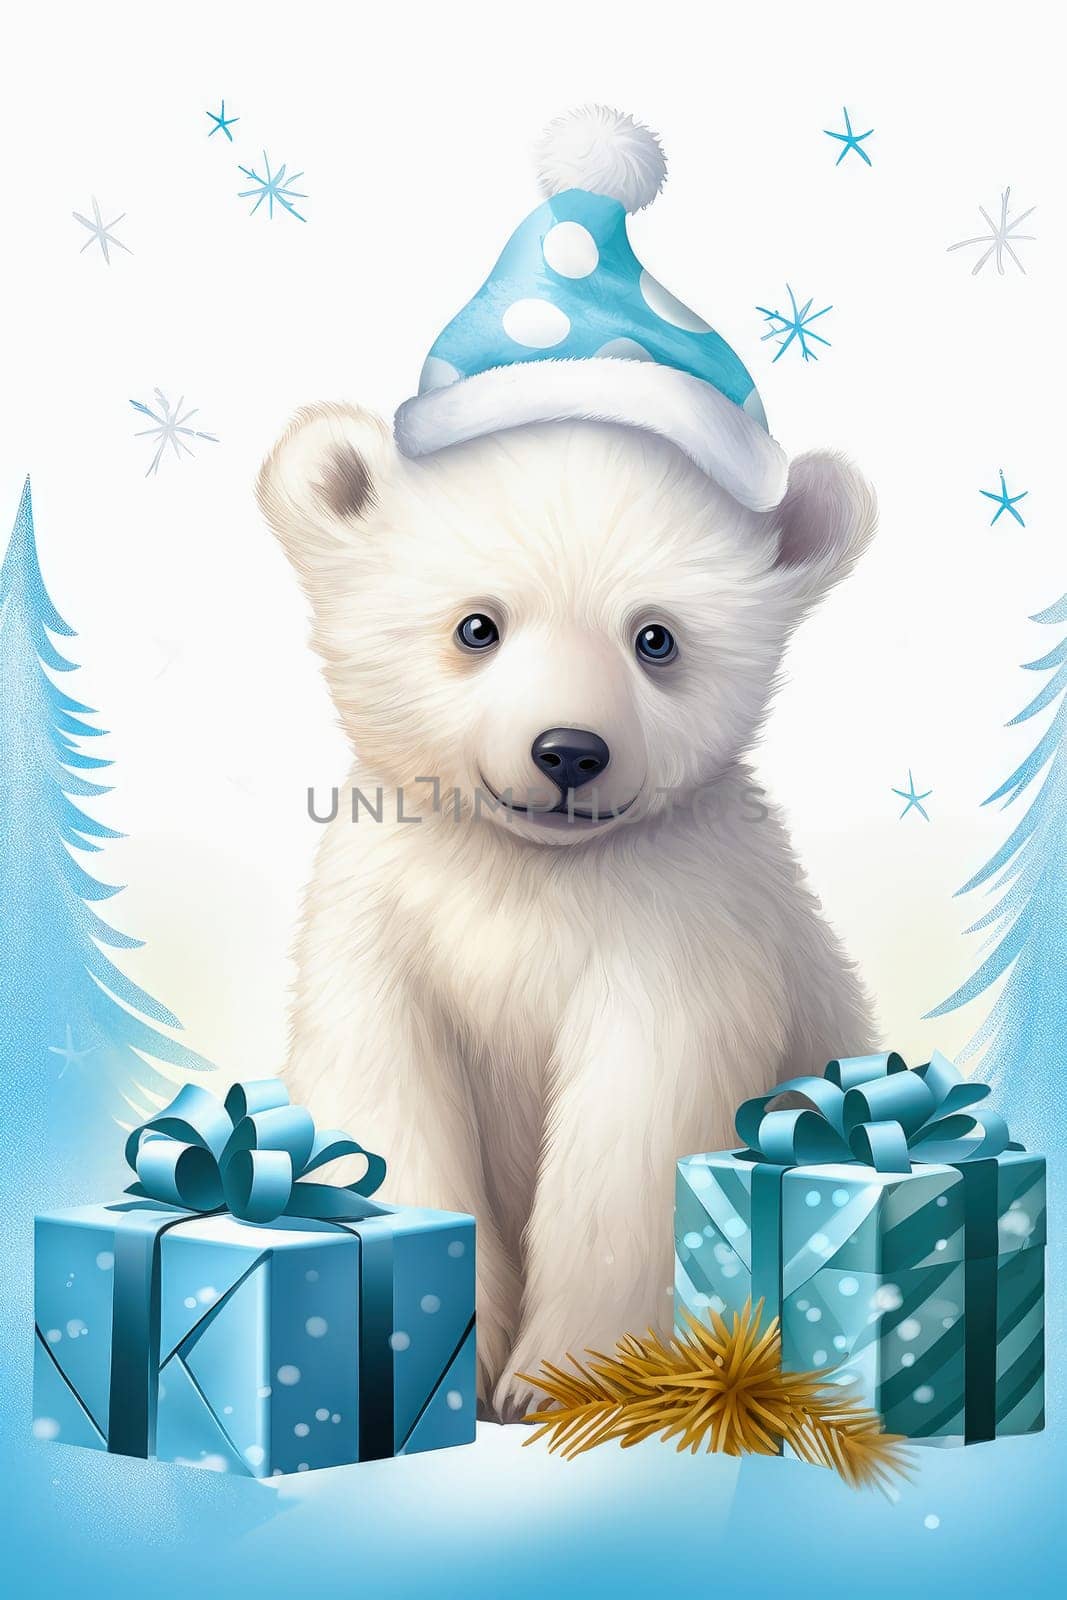 White little bear in New Year, hat with gifts. New Year's holiday concept. by Yurich32